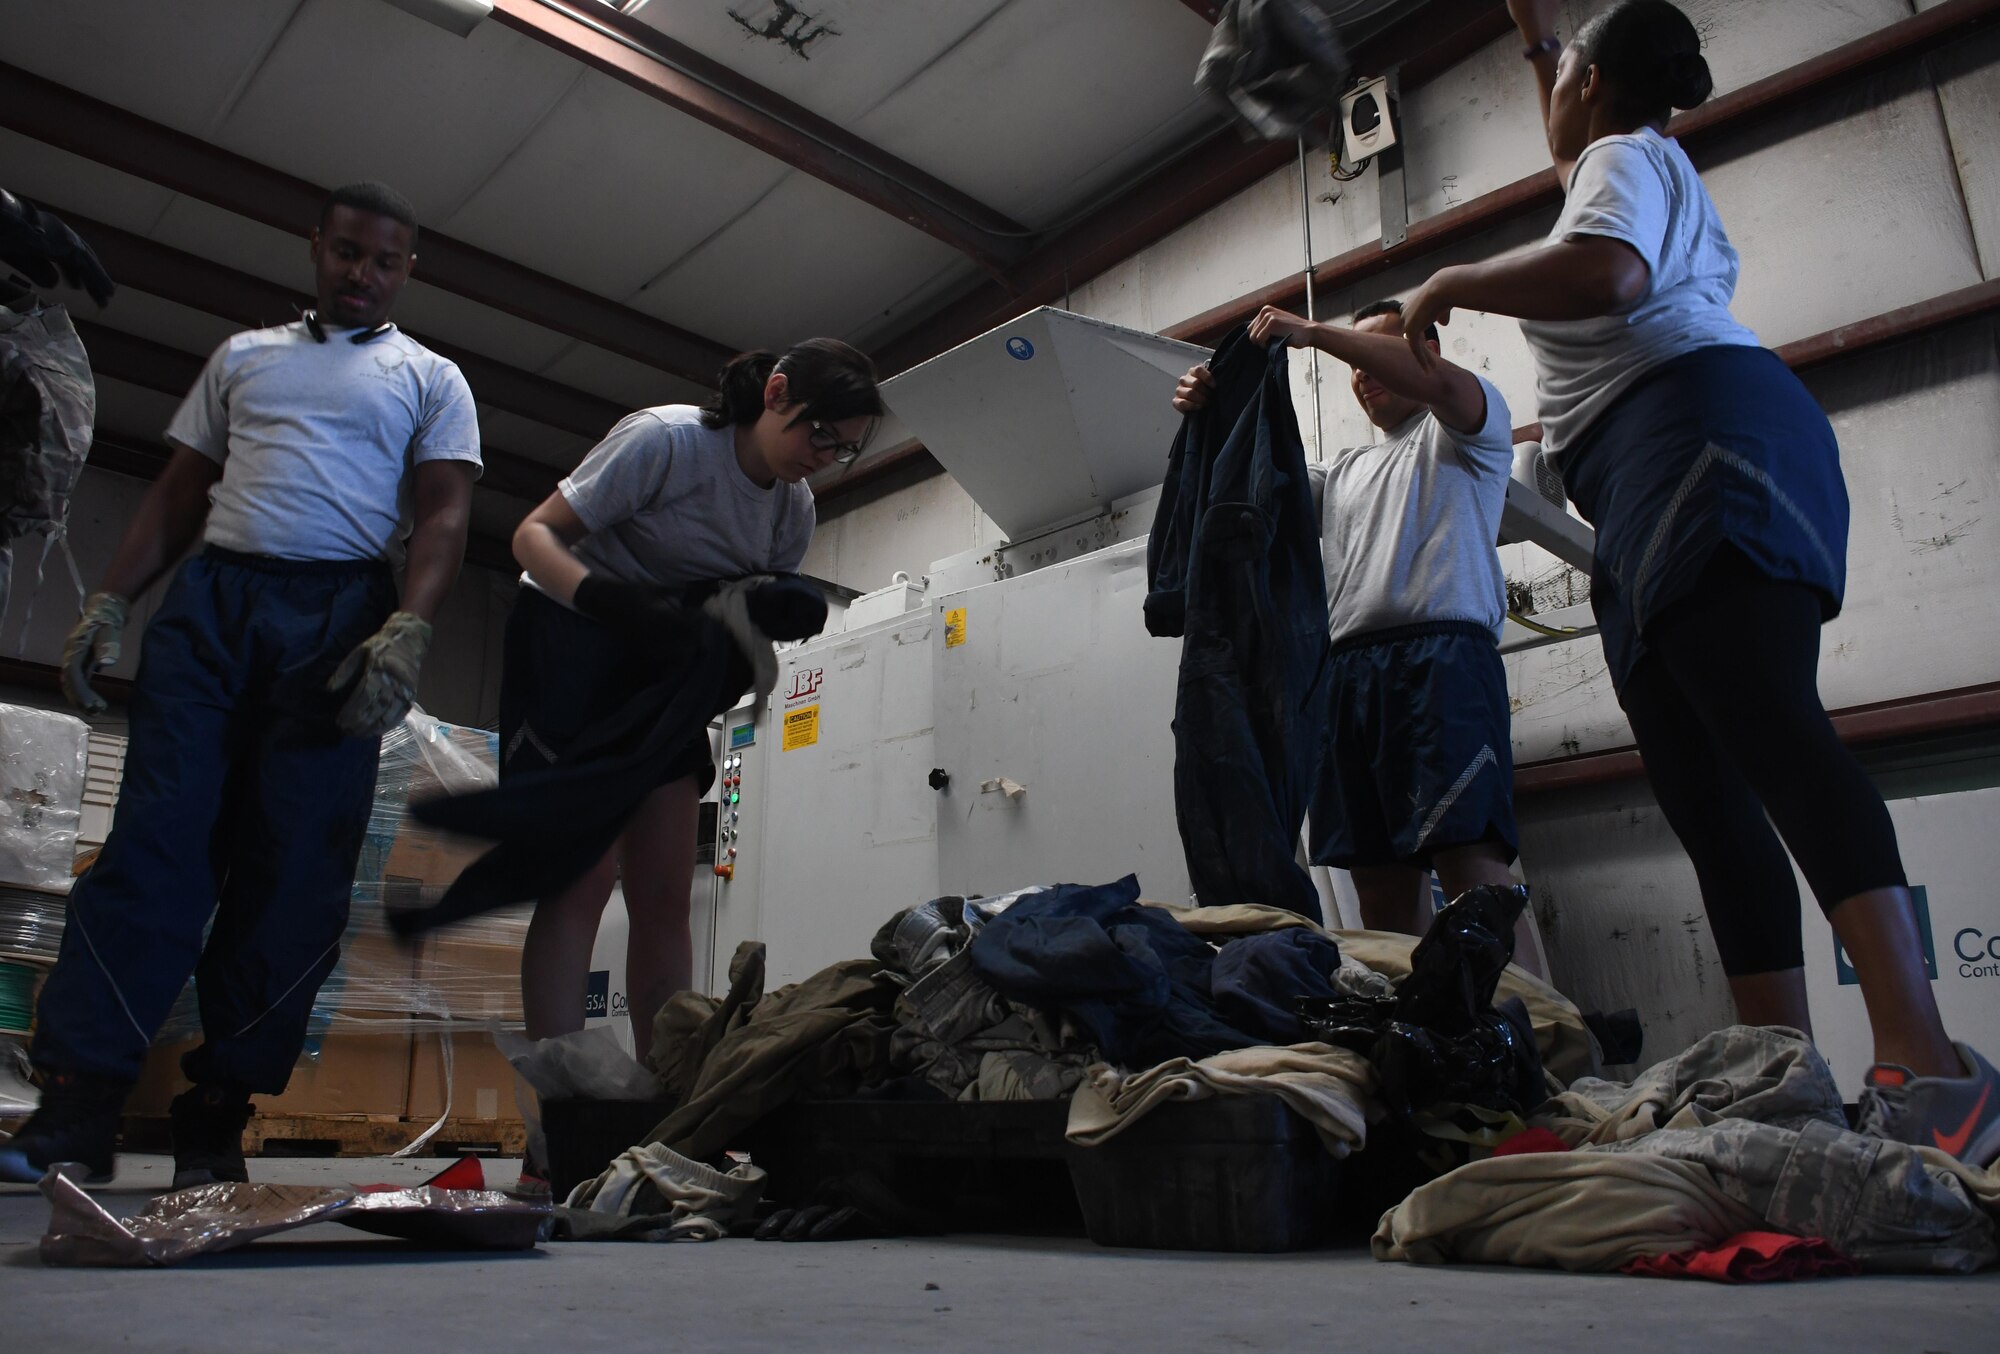 U.S. Airmen sort through uniforms at Al Udeid Air Base, Qatar, March 10, 2017. The uniforms were gathered from uniform disposal bins from around the base, and were being sorted into serviceable and unserviceable piles. Serviceable uniform items are donated to the Airman’s Attic, while the unserviceable items are shredded. (U.S. Air Force photo by Senior Airman Miles Wilson)